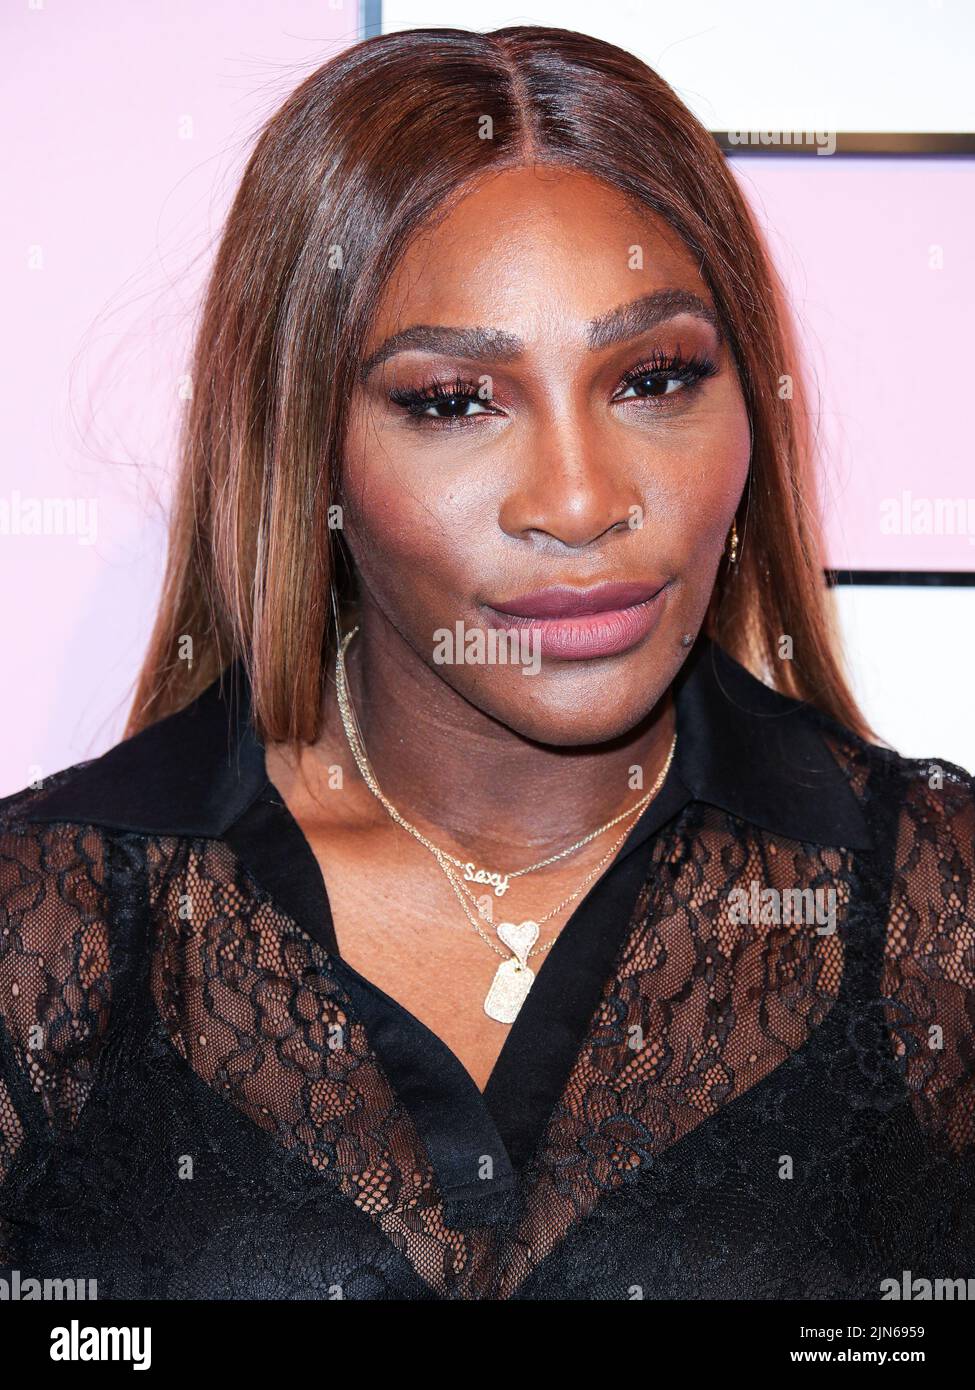 New York City, United States. 09th Aug, 2022. (FILE) Serena Williams Says She Will Retire From Tennis After U.S. Open. MANHATTAN, NEW YORK CITY, NEW YORK, USA - SEPTEMBER 10: American tennis player Serena Williams arrives at S by Serena Williams during New York Fashion Week: The Shows held at Metropolitan West on September 10, 2019 in Manhattan, New York City, New York, United States. (Photo by Xavier Collin/Image Press Agency) Credit: Image Press Agency/Alamy Live News Stock Photo